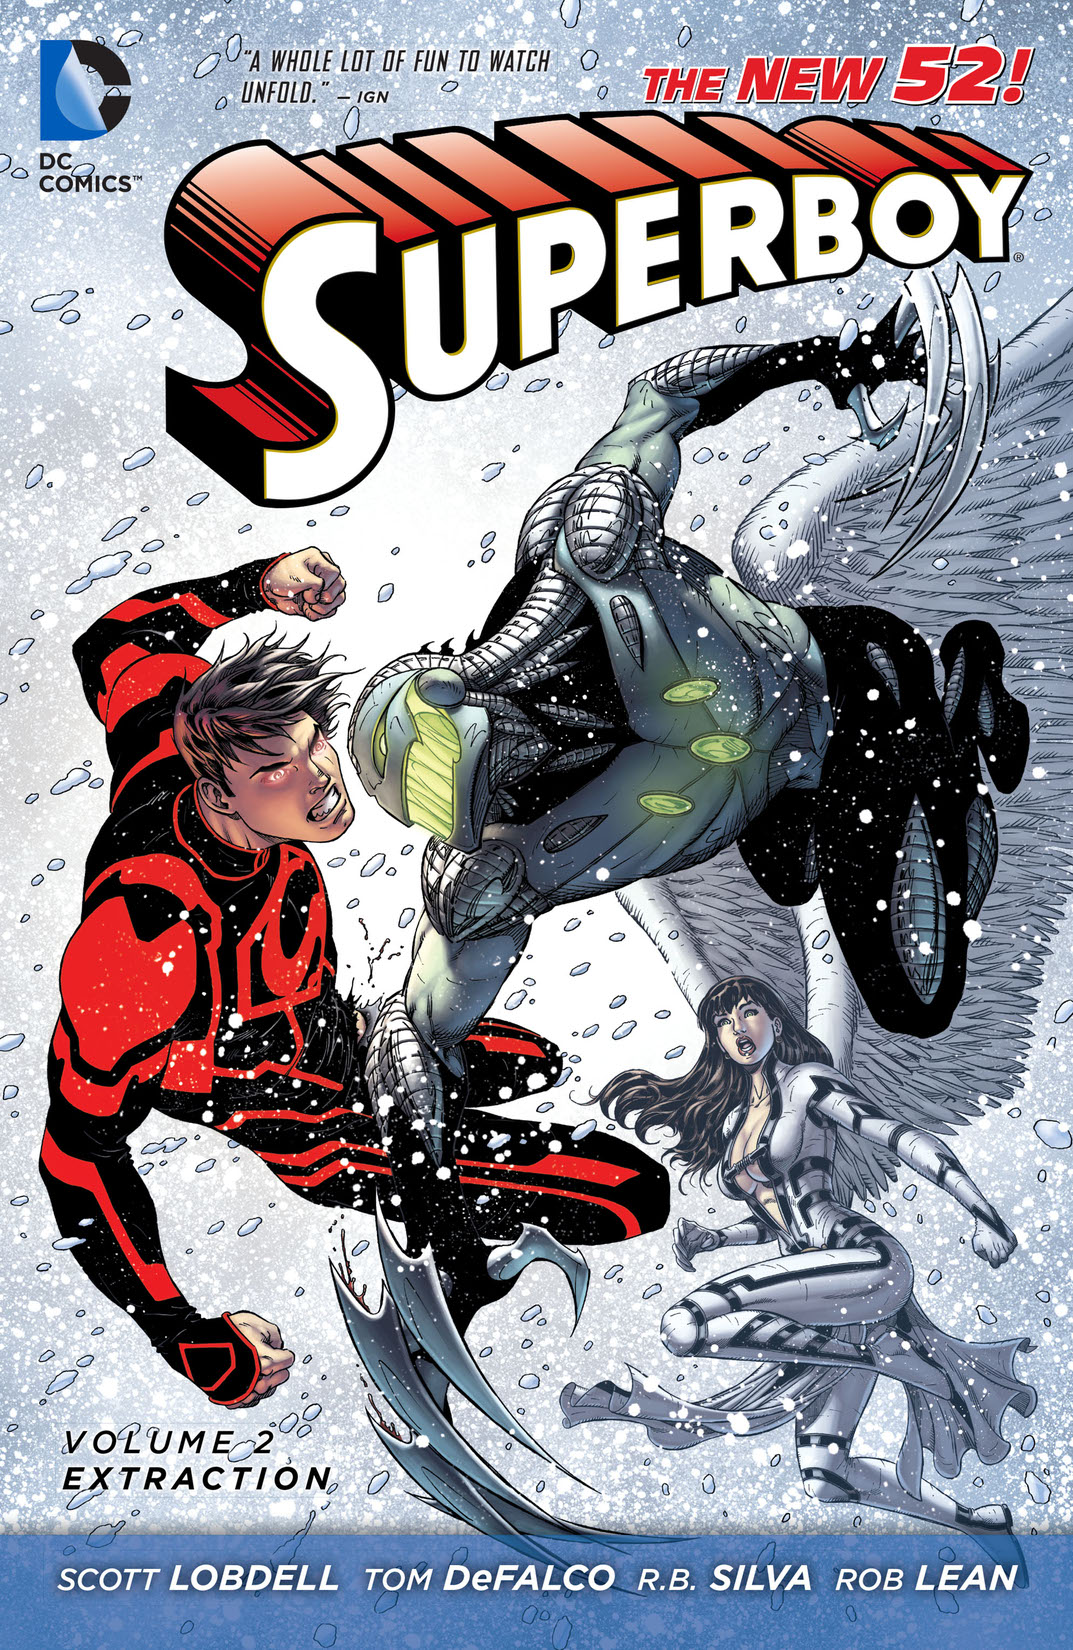 Superboy Vol. 2: Extraction preview images